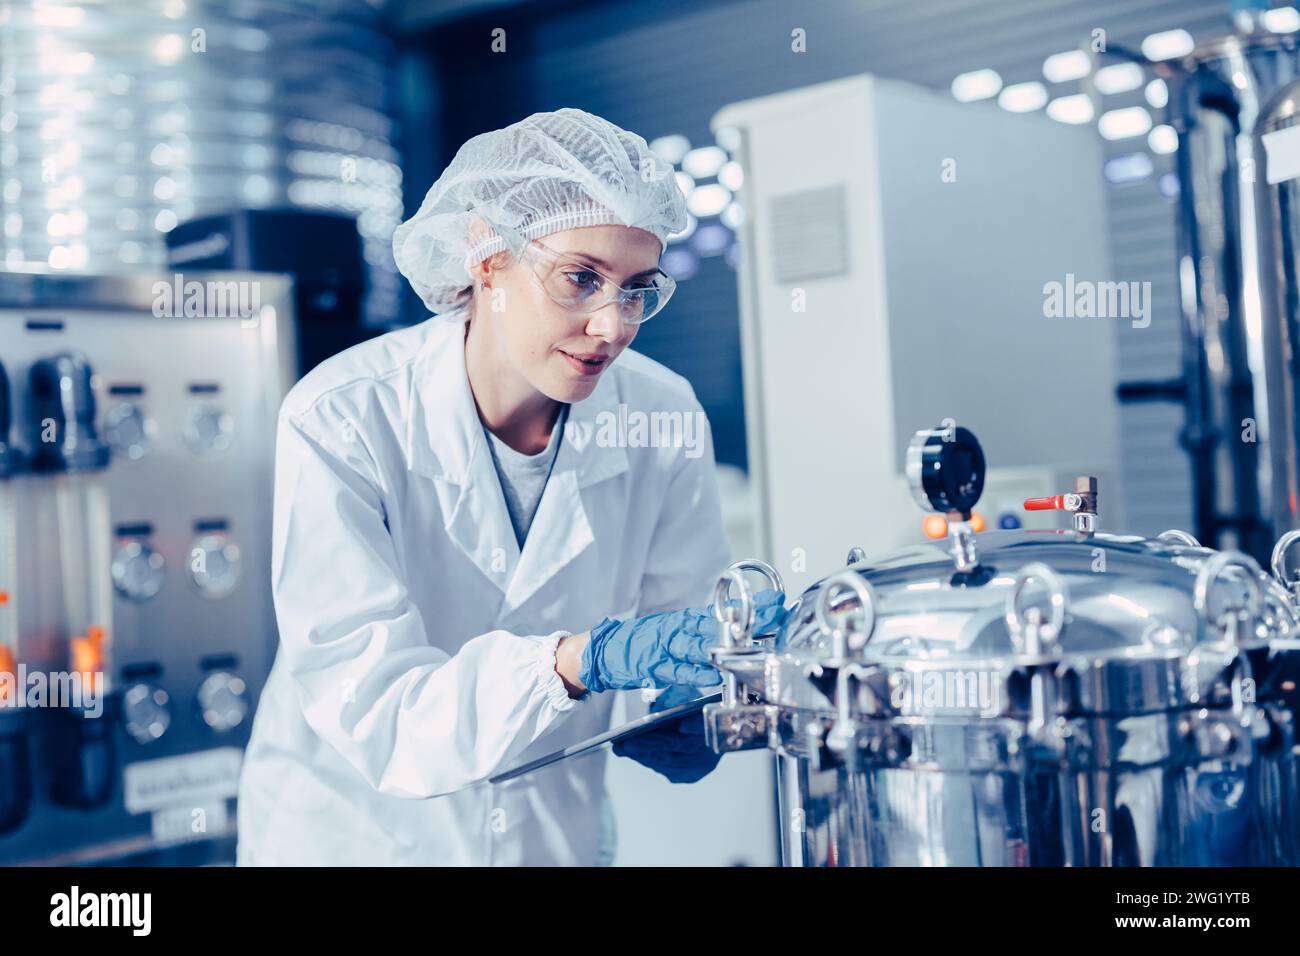 staff work in science medical lab factory check record pressure tank happy working Stock Photo